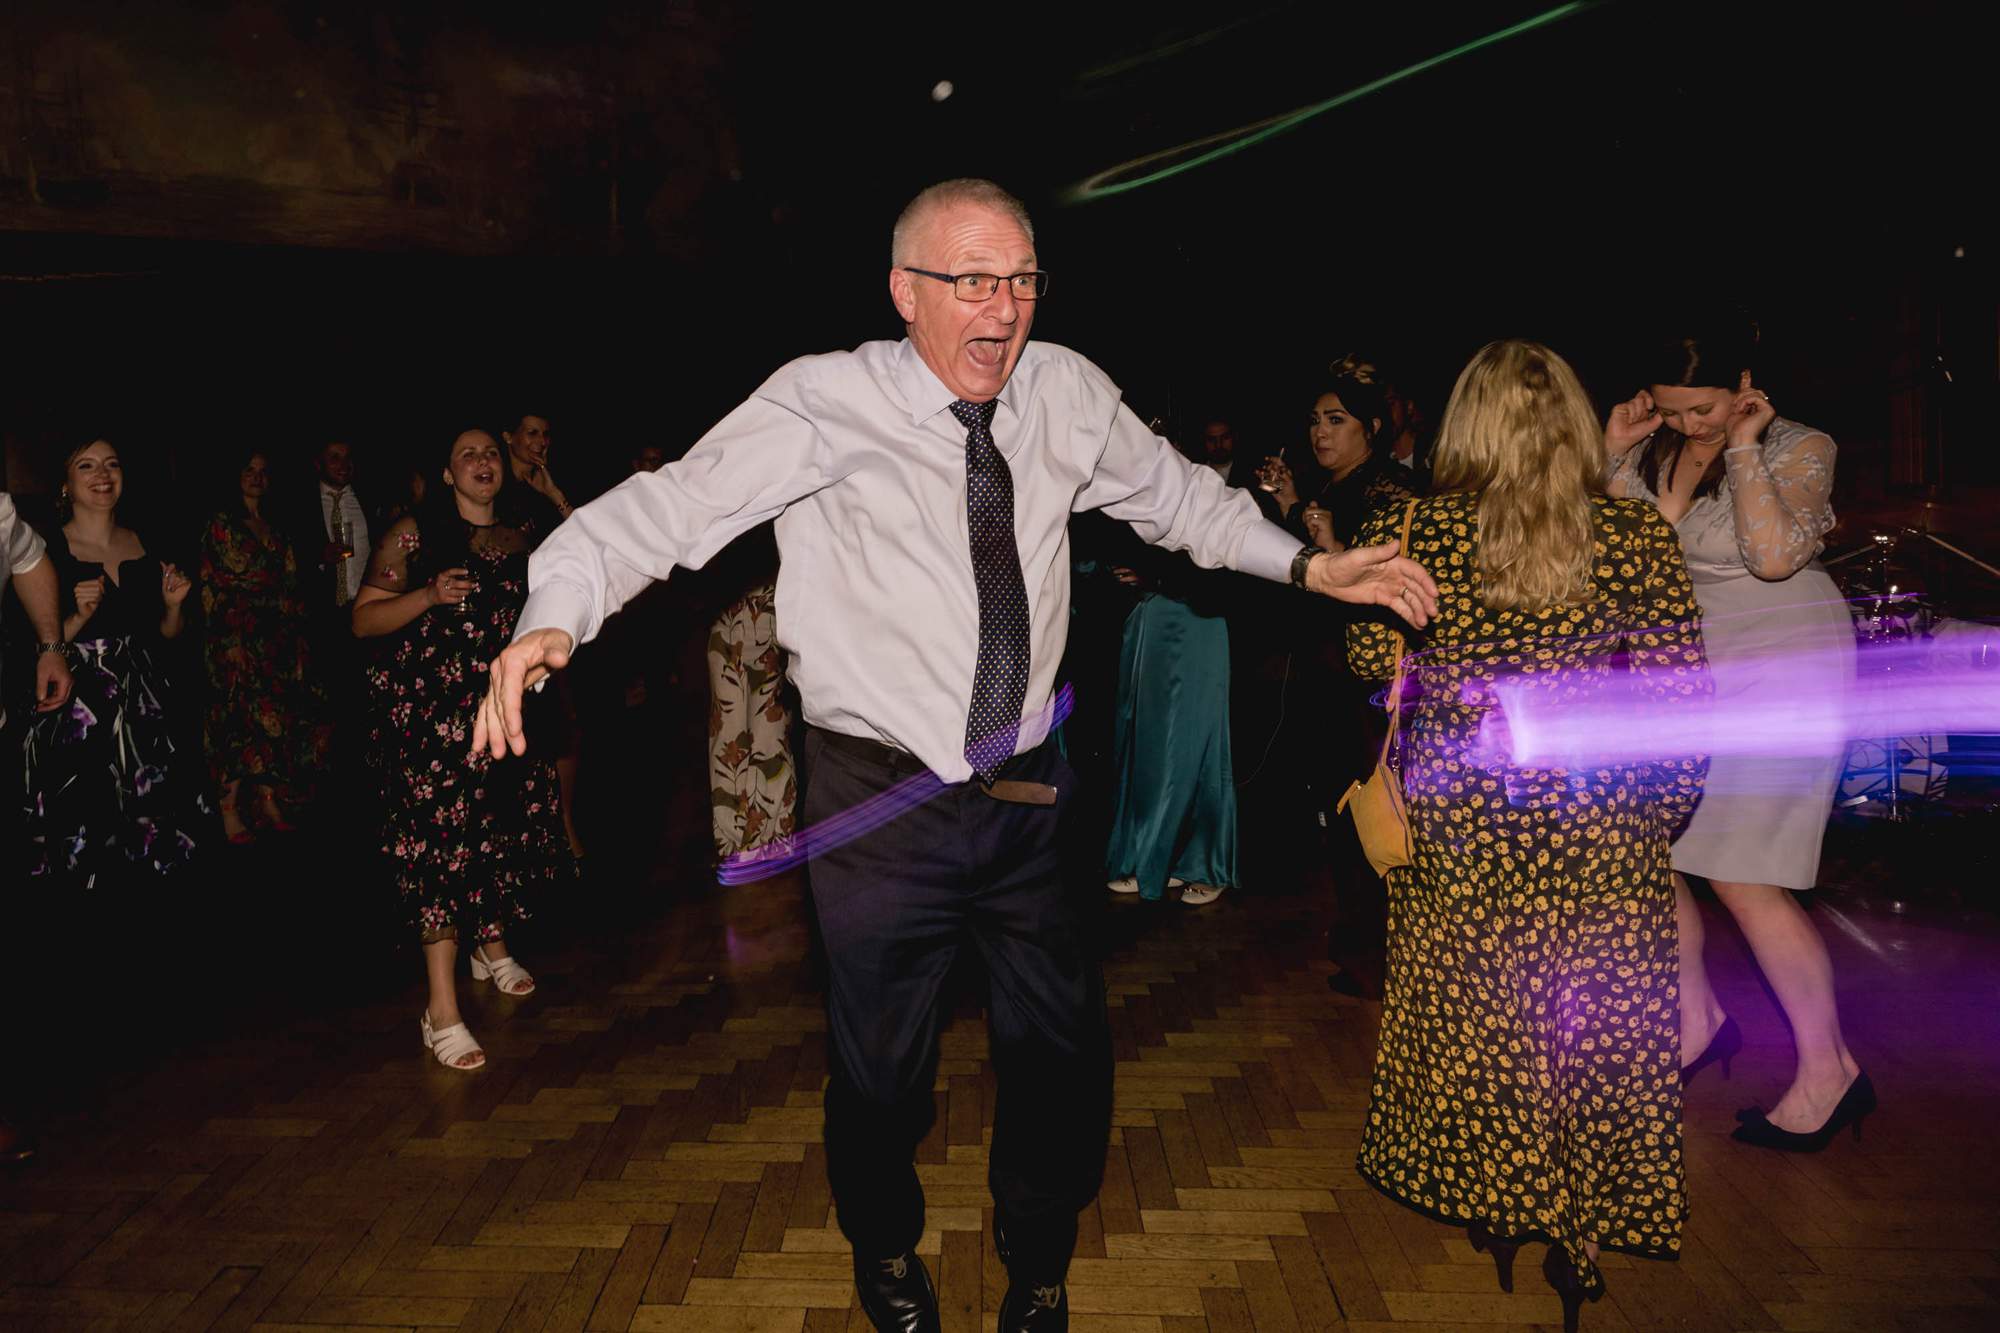 Father of the bride jumps in the air on the dance floor at a wedding.